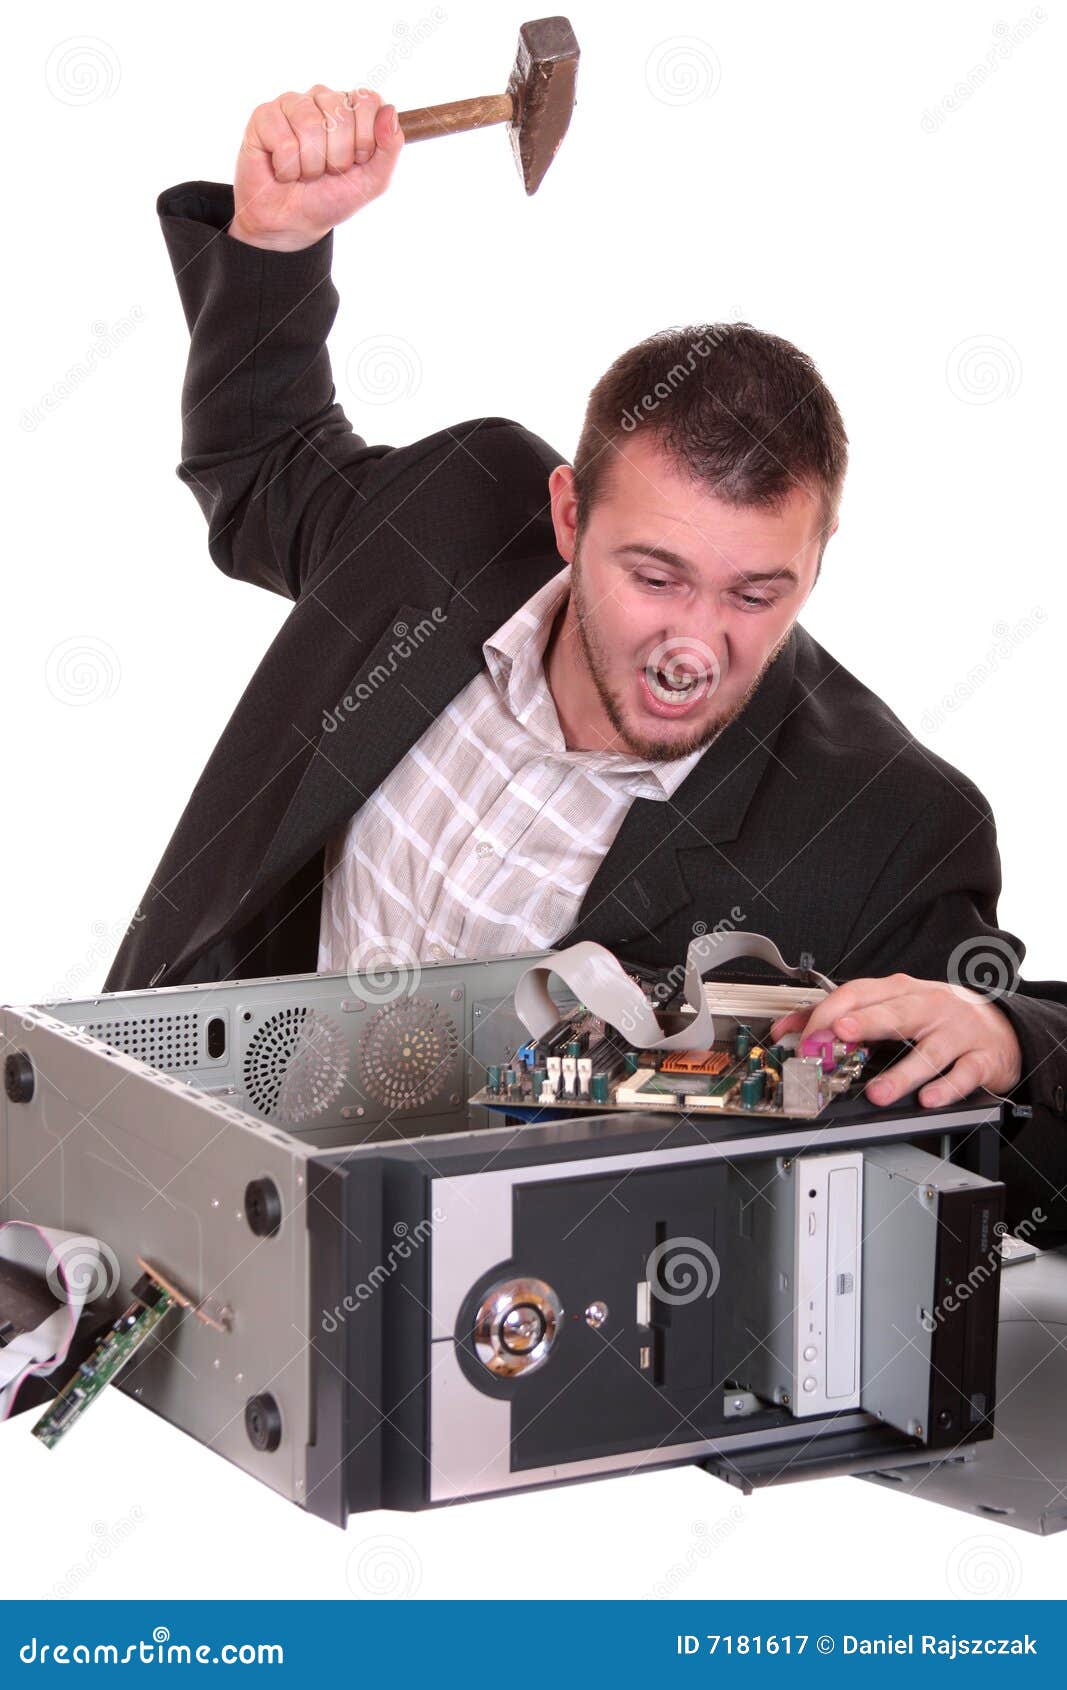 The man with the hammer stock image. Image of busy, repairman - 7181617